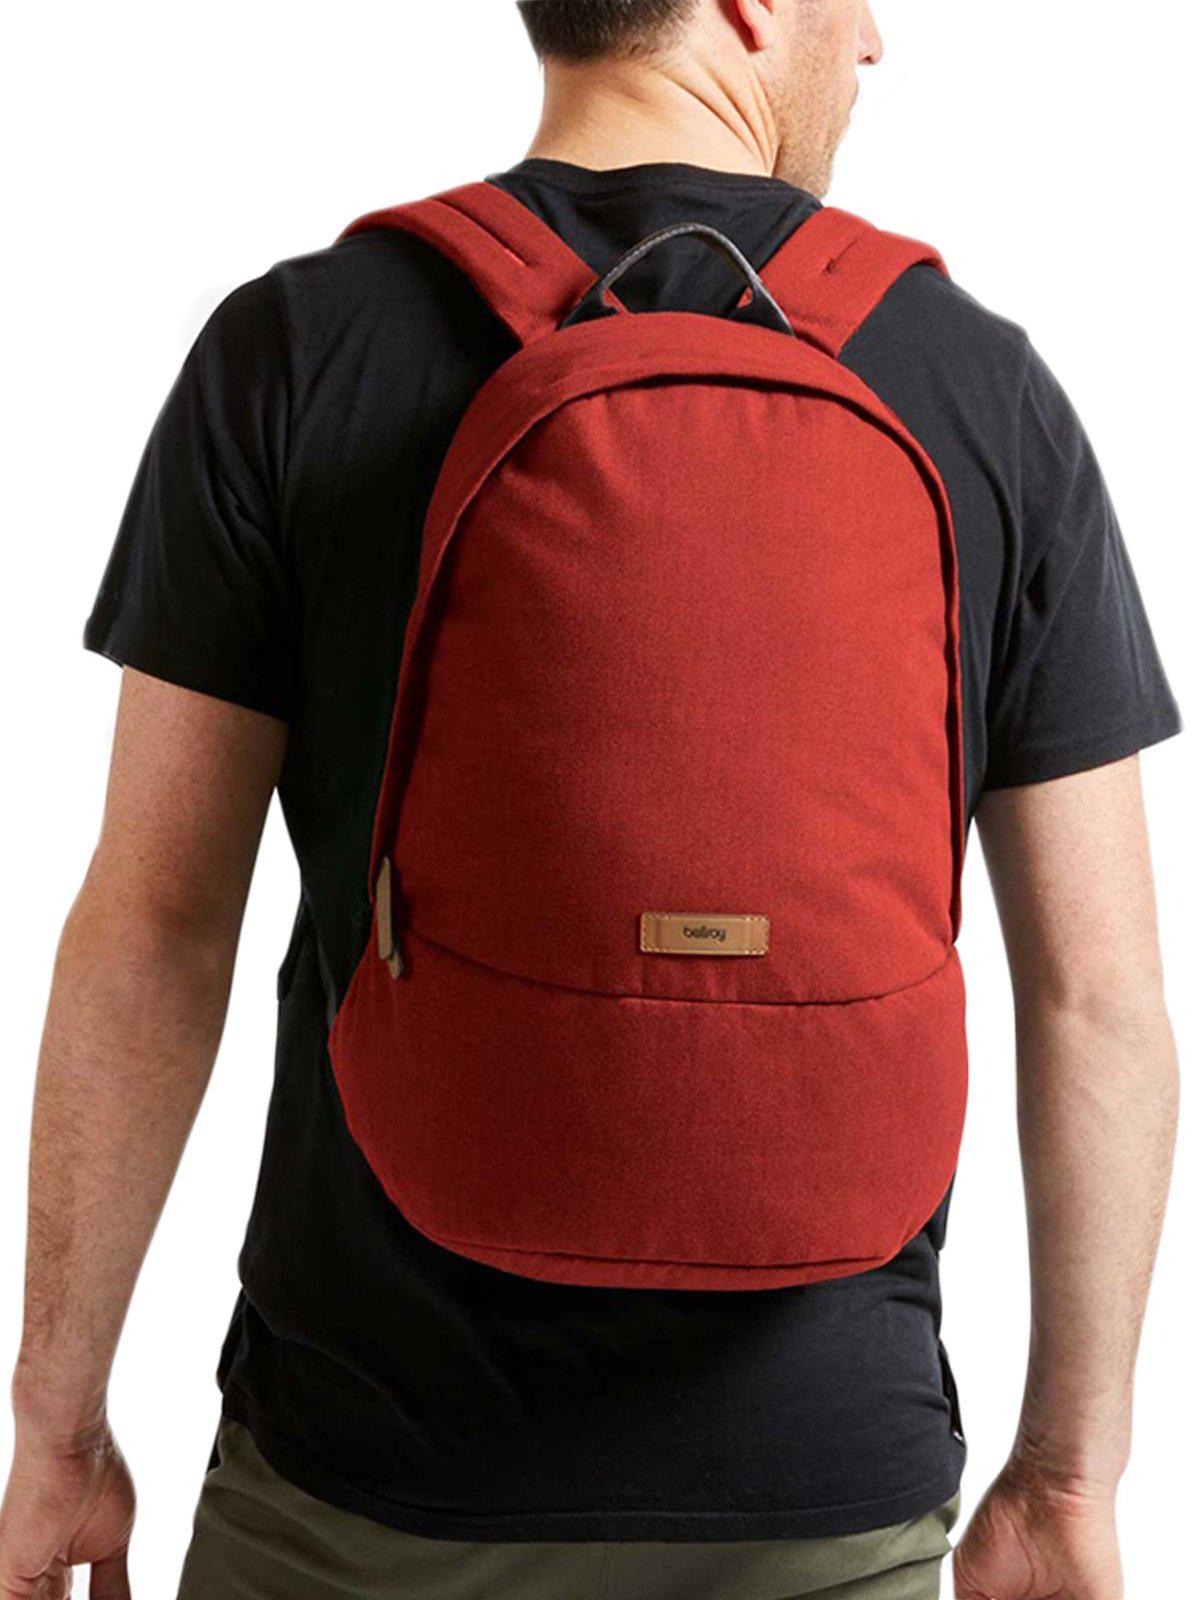 Bellroy Classic Backpack Red Ochre - MORE by Morello Indonesia